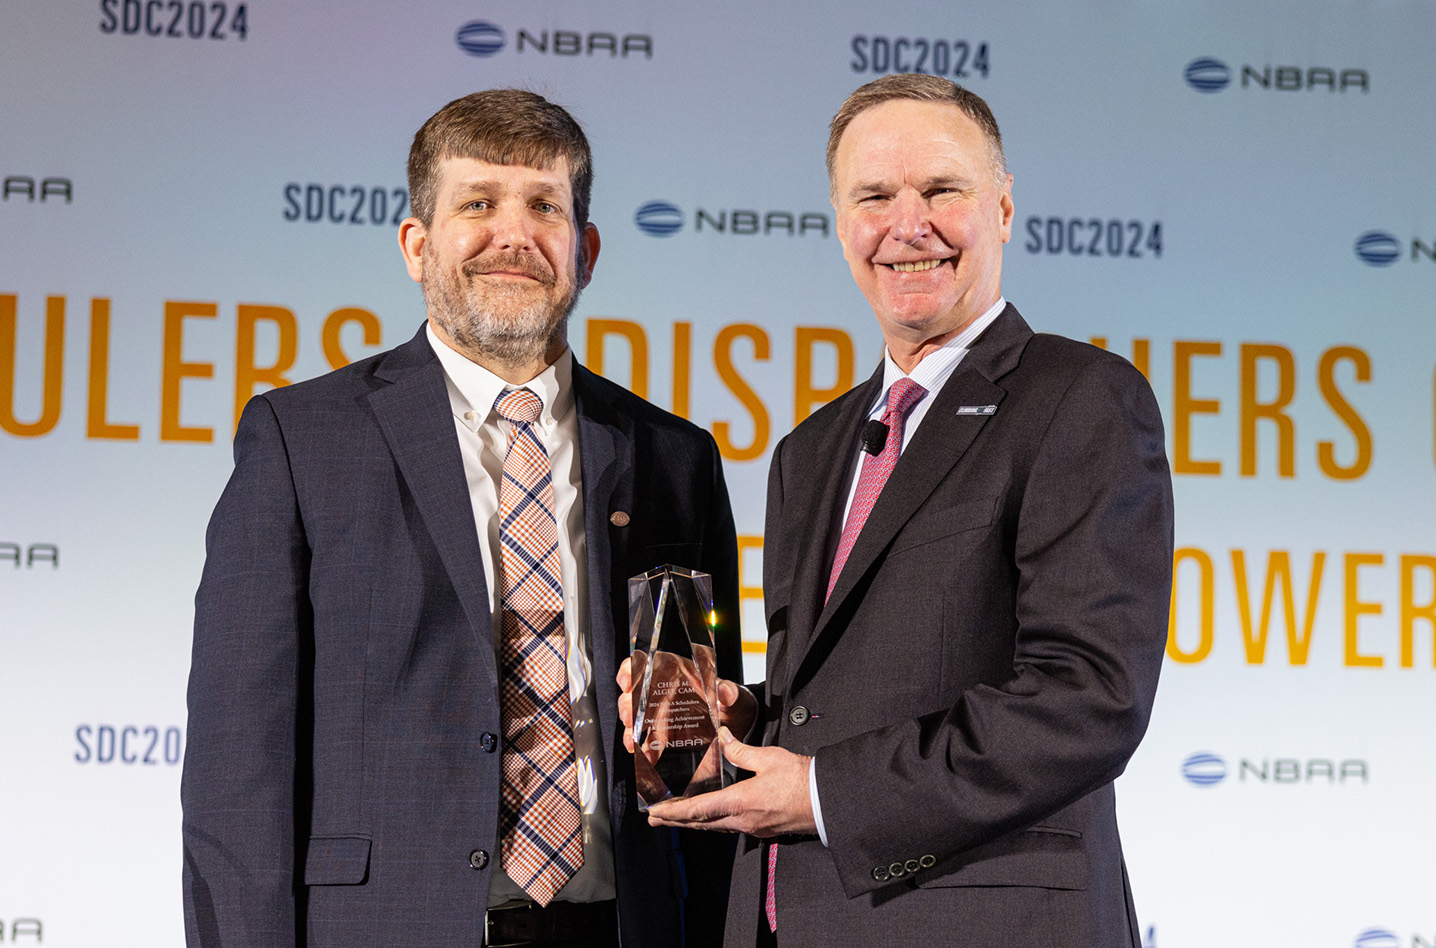 Chris Algee, CAM (left), presented with the Schedulers & Dispatchers (S&D) Outstanding Achievement and Leadership Award by NBAA's Ed Bolen (right)